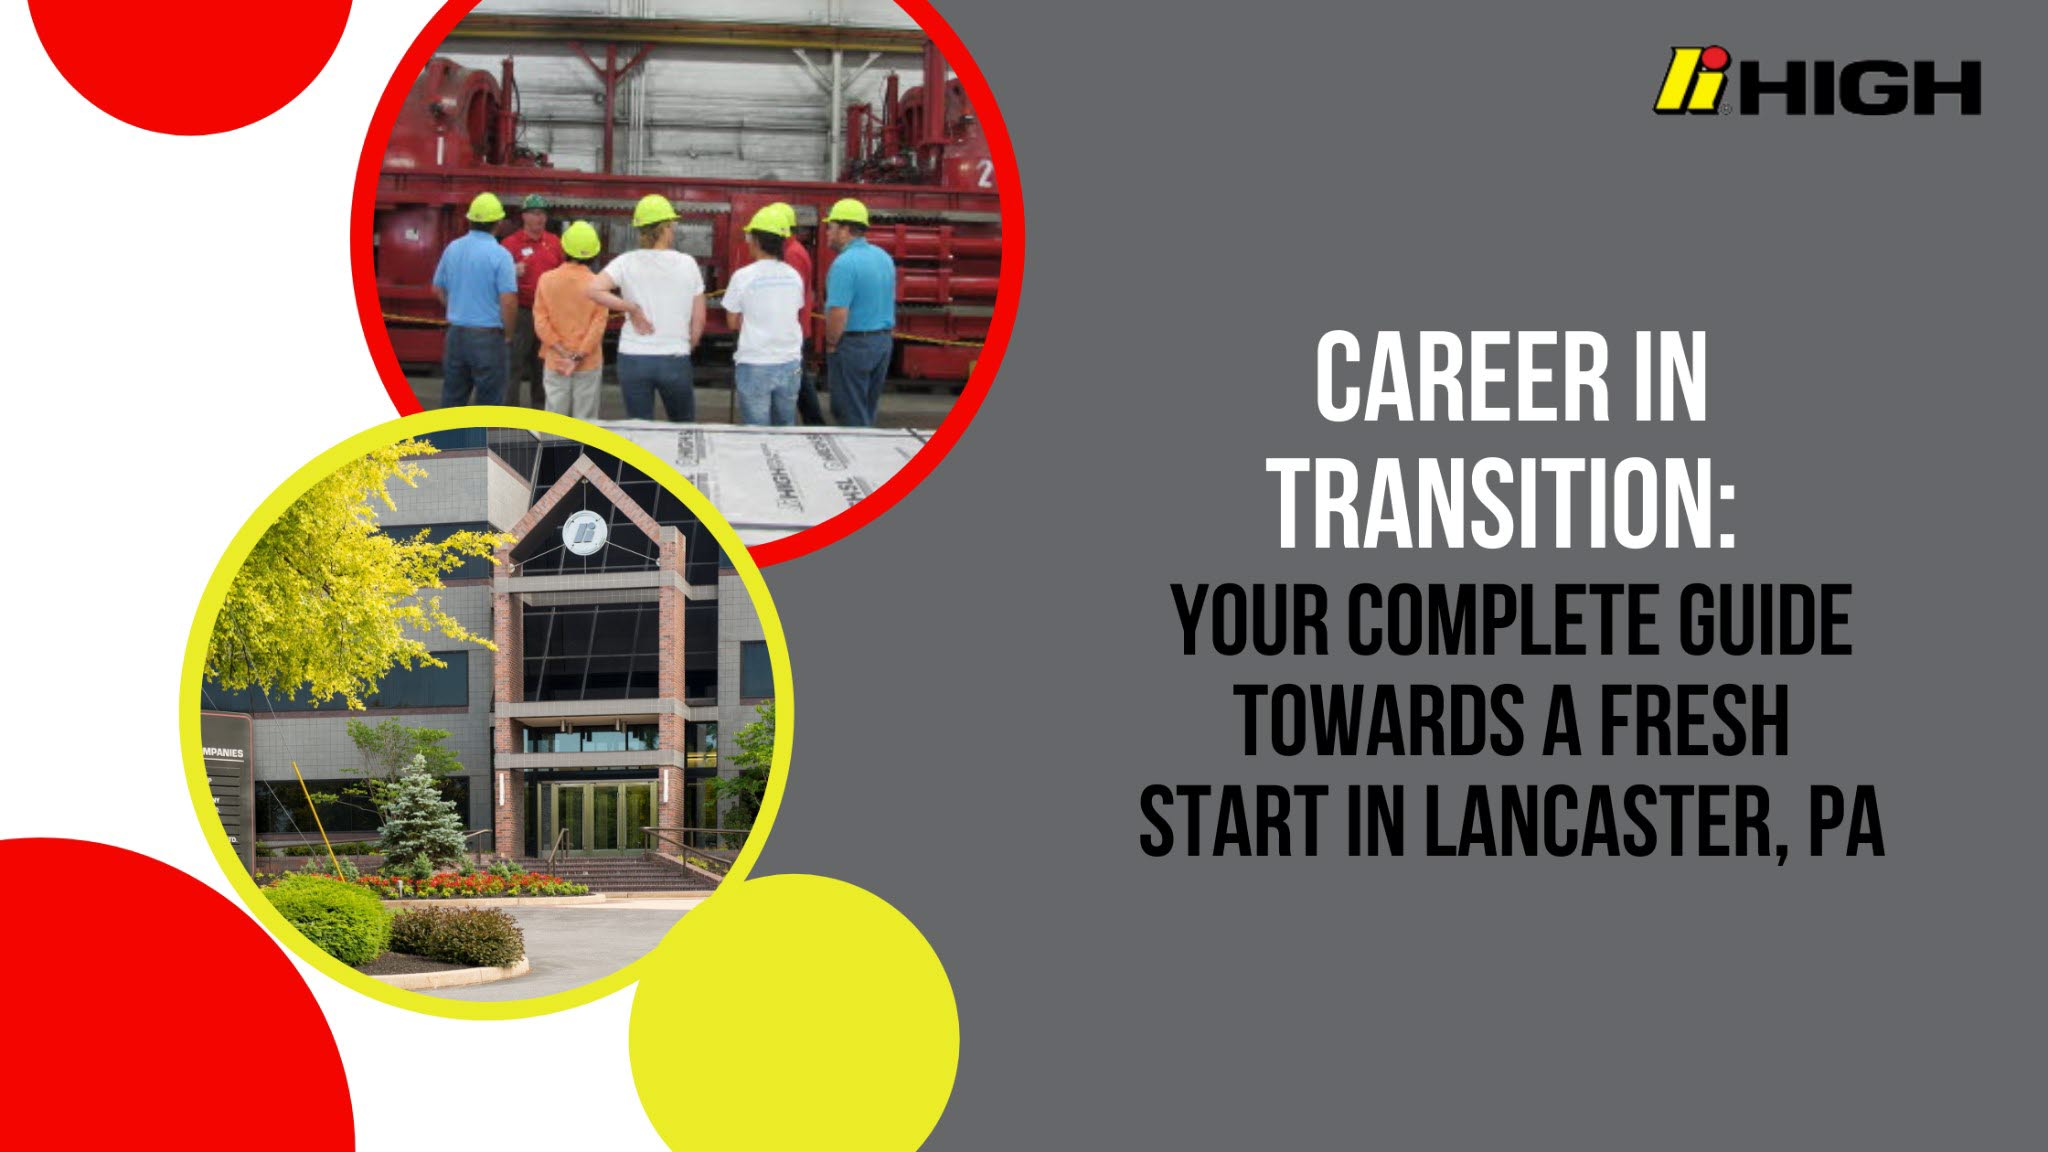 Career in Transition: Your Complete Guide to a Fresh Start in Lancaster, PA